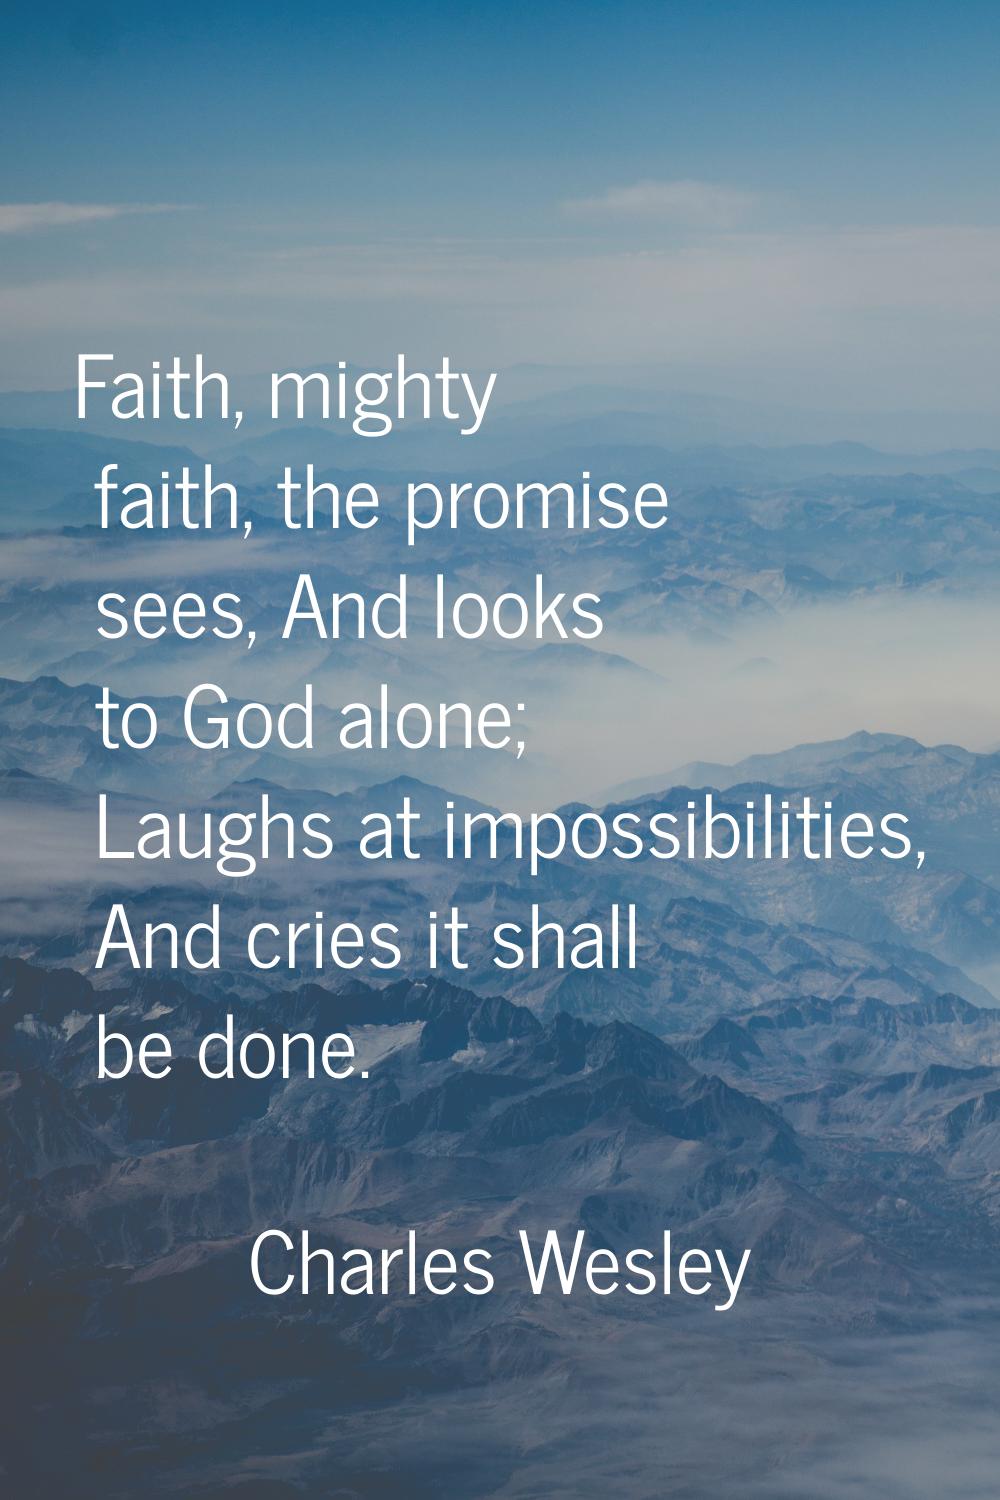 Faith, mighty faith, the promise sees, And looks to God alone; Laughs at impossibilities, And cries